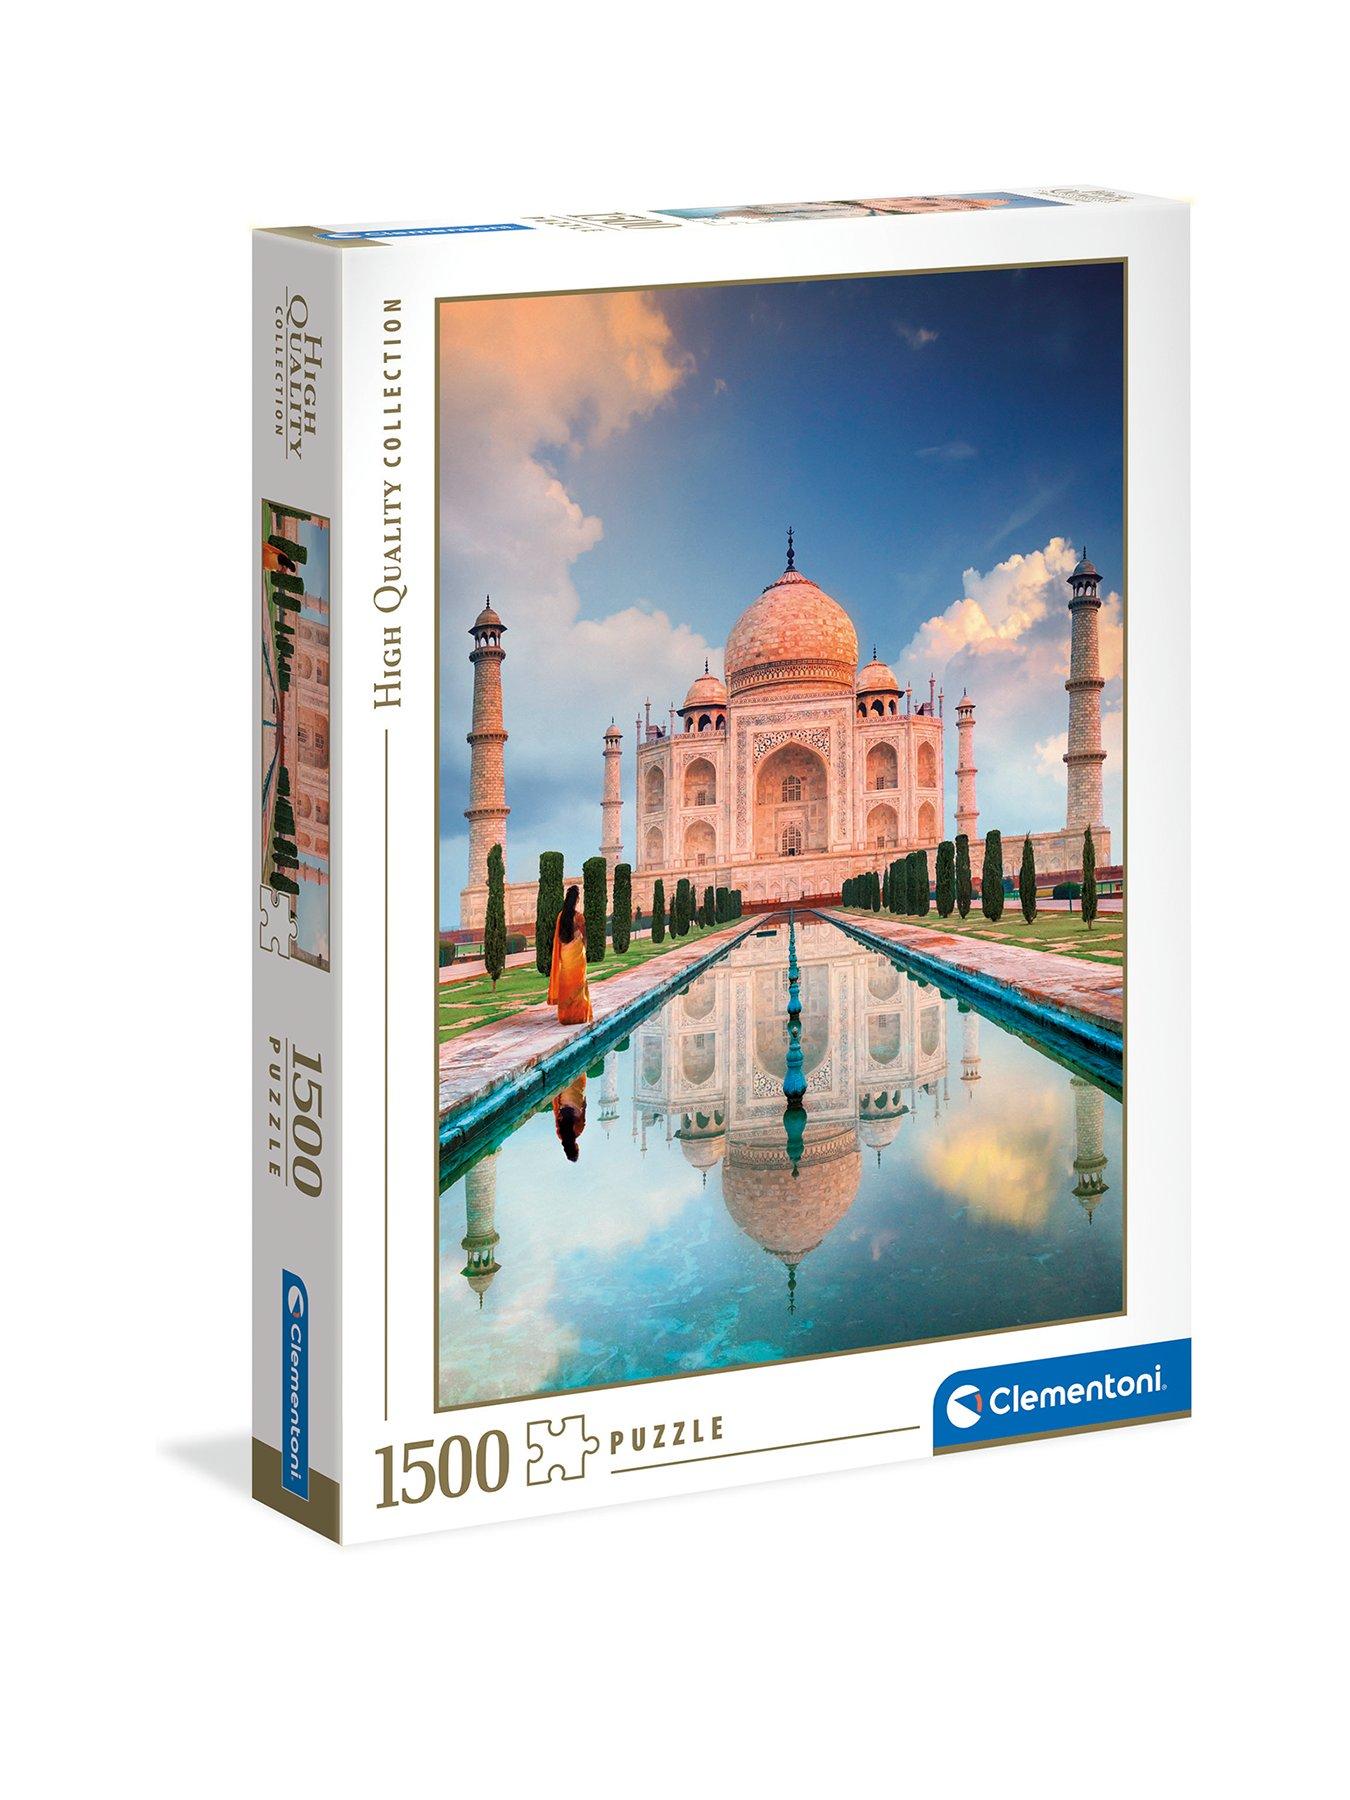 Puzzles for Adults 3000 Piece Every Piece is Unique Virgin Jigsaw Puzzles for Adults